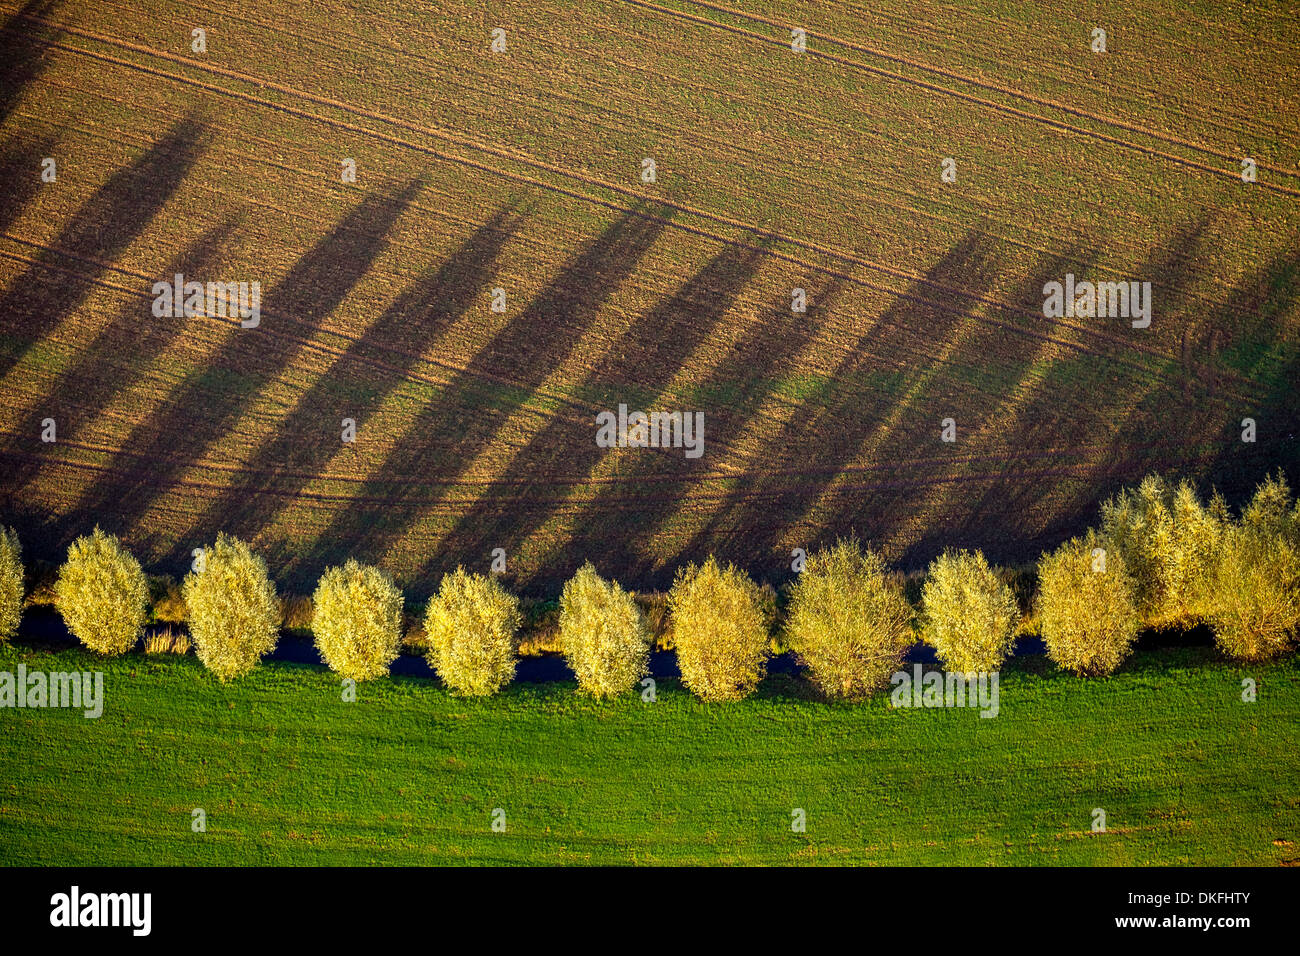 Row of trees with shadows, autumn, aerial view, Duisburg, Ruhr area, North Rhine-Westphalia, Germany Stock Photo